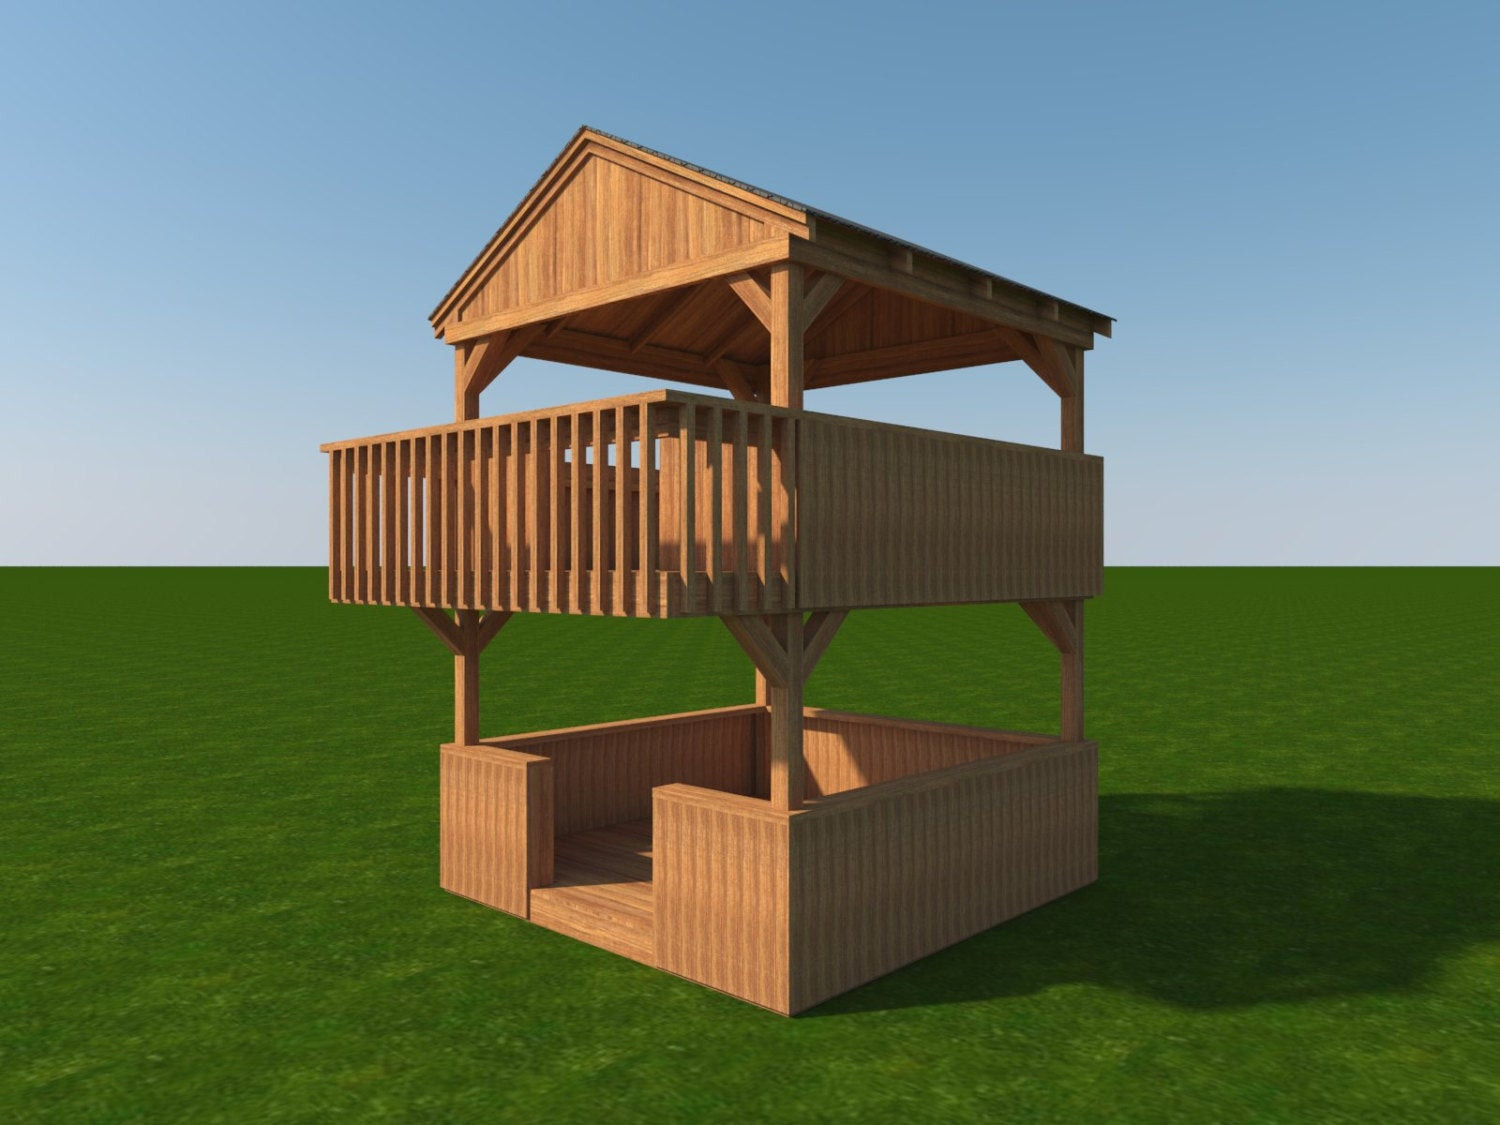 DIY Building Plans
 Build your own 2 Story Playhouse Fort DIY Plans Fun to build